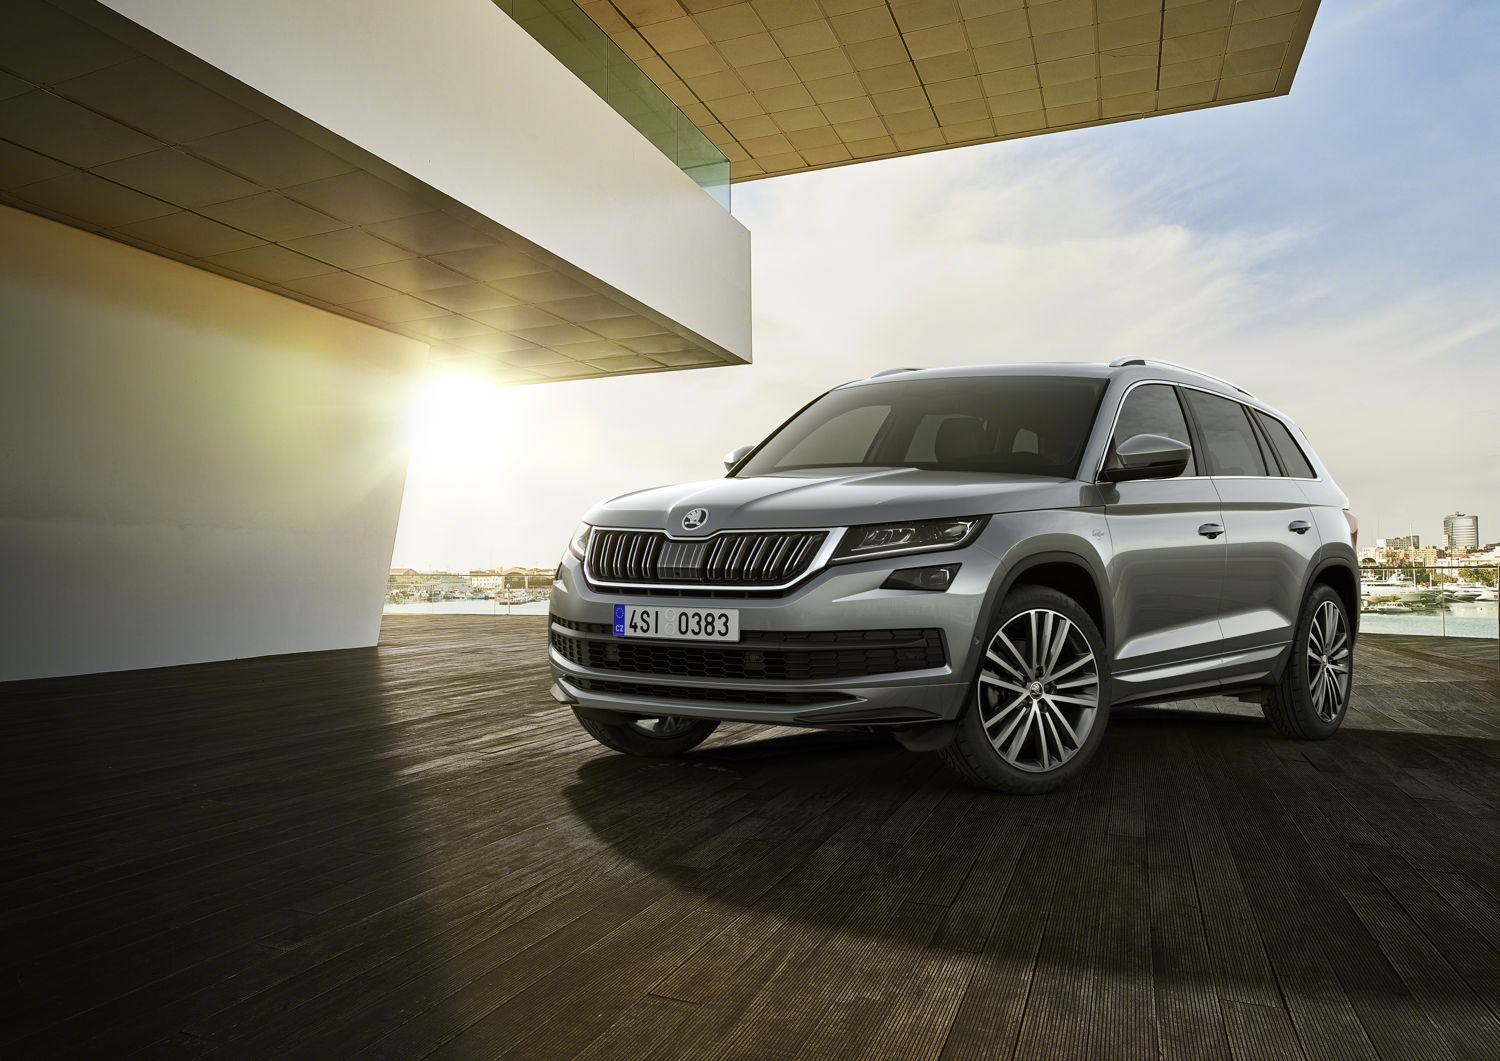 Exclusive designs and extensive comfort features characterise the stylish nature of the top version of ŠKODA’s large SUV.